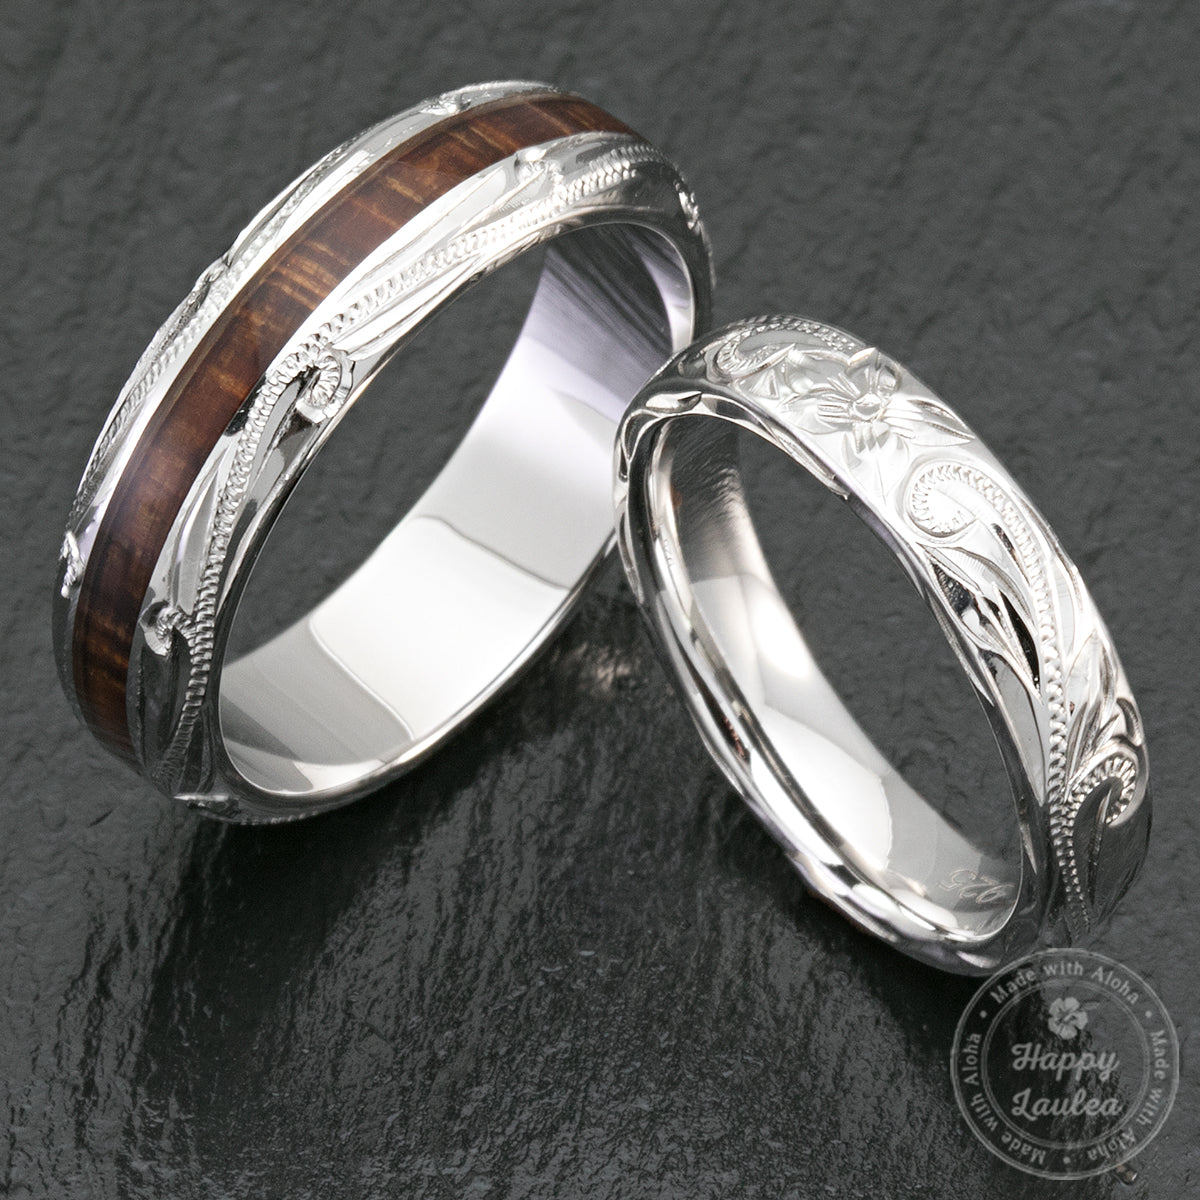 Pair of 4&6mm Sterling Silver Hawaiian Jewelry Couple/Wedding Rings with Koa Wood Inlay - Dome Shape,  Comfort Fitment